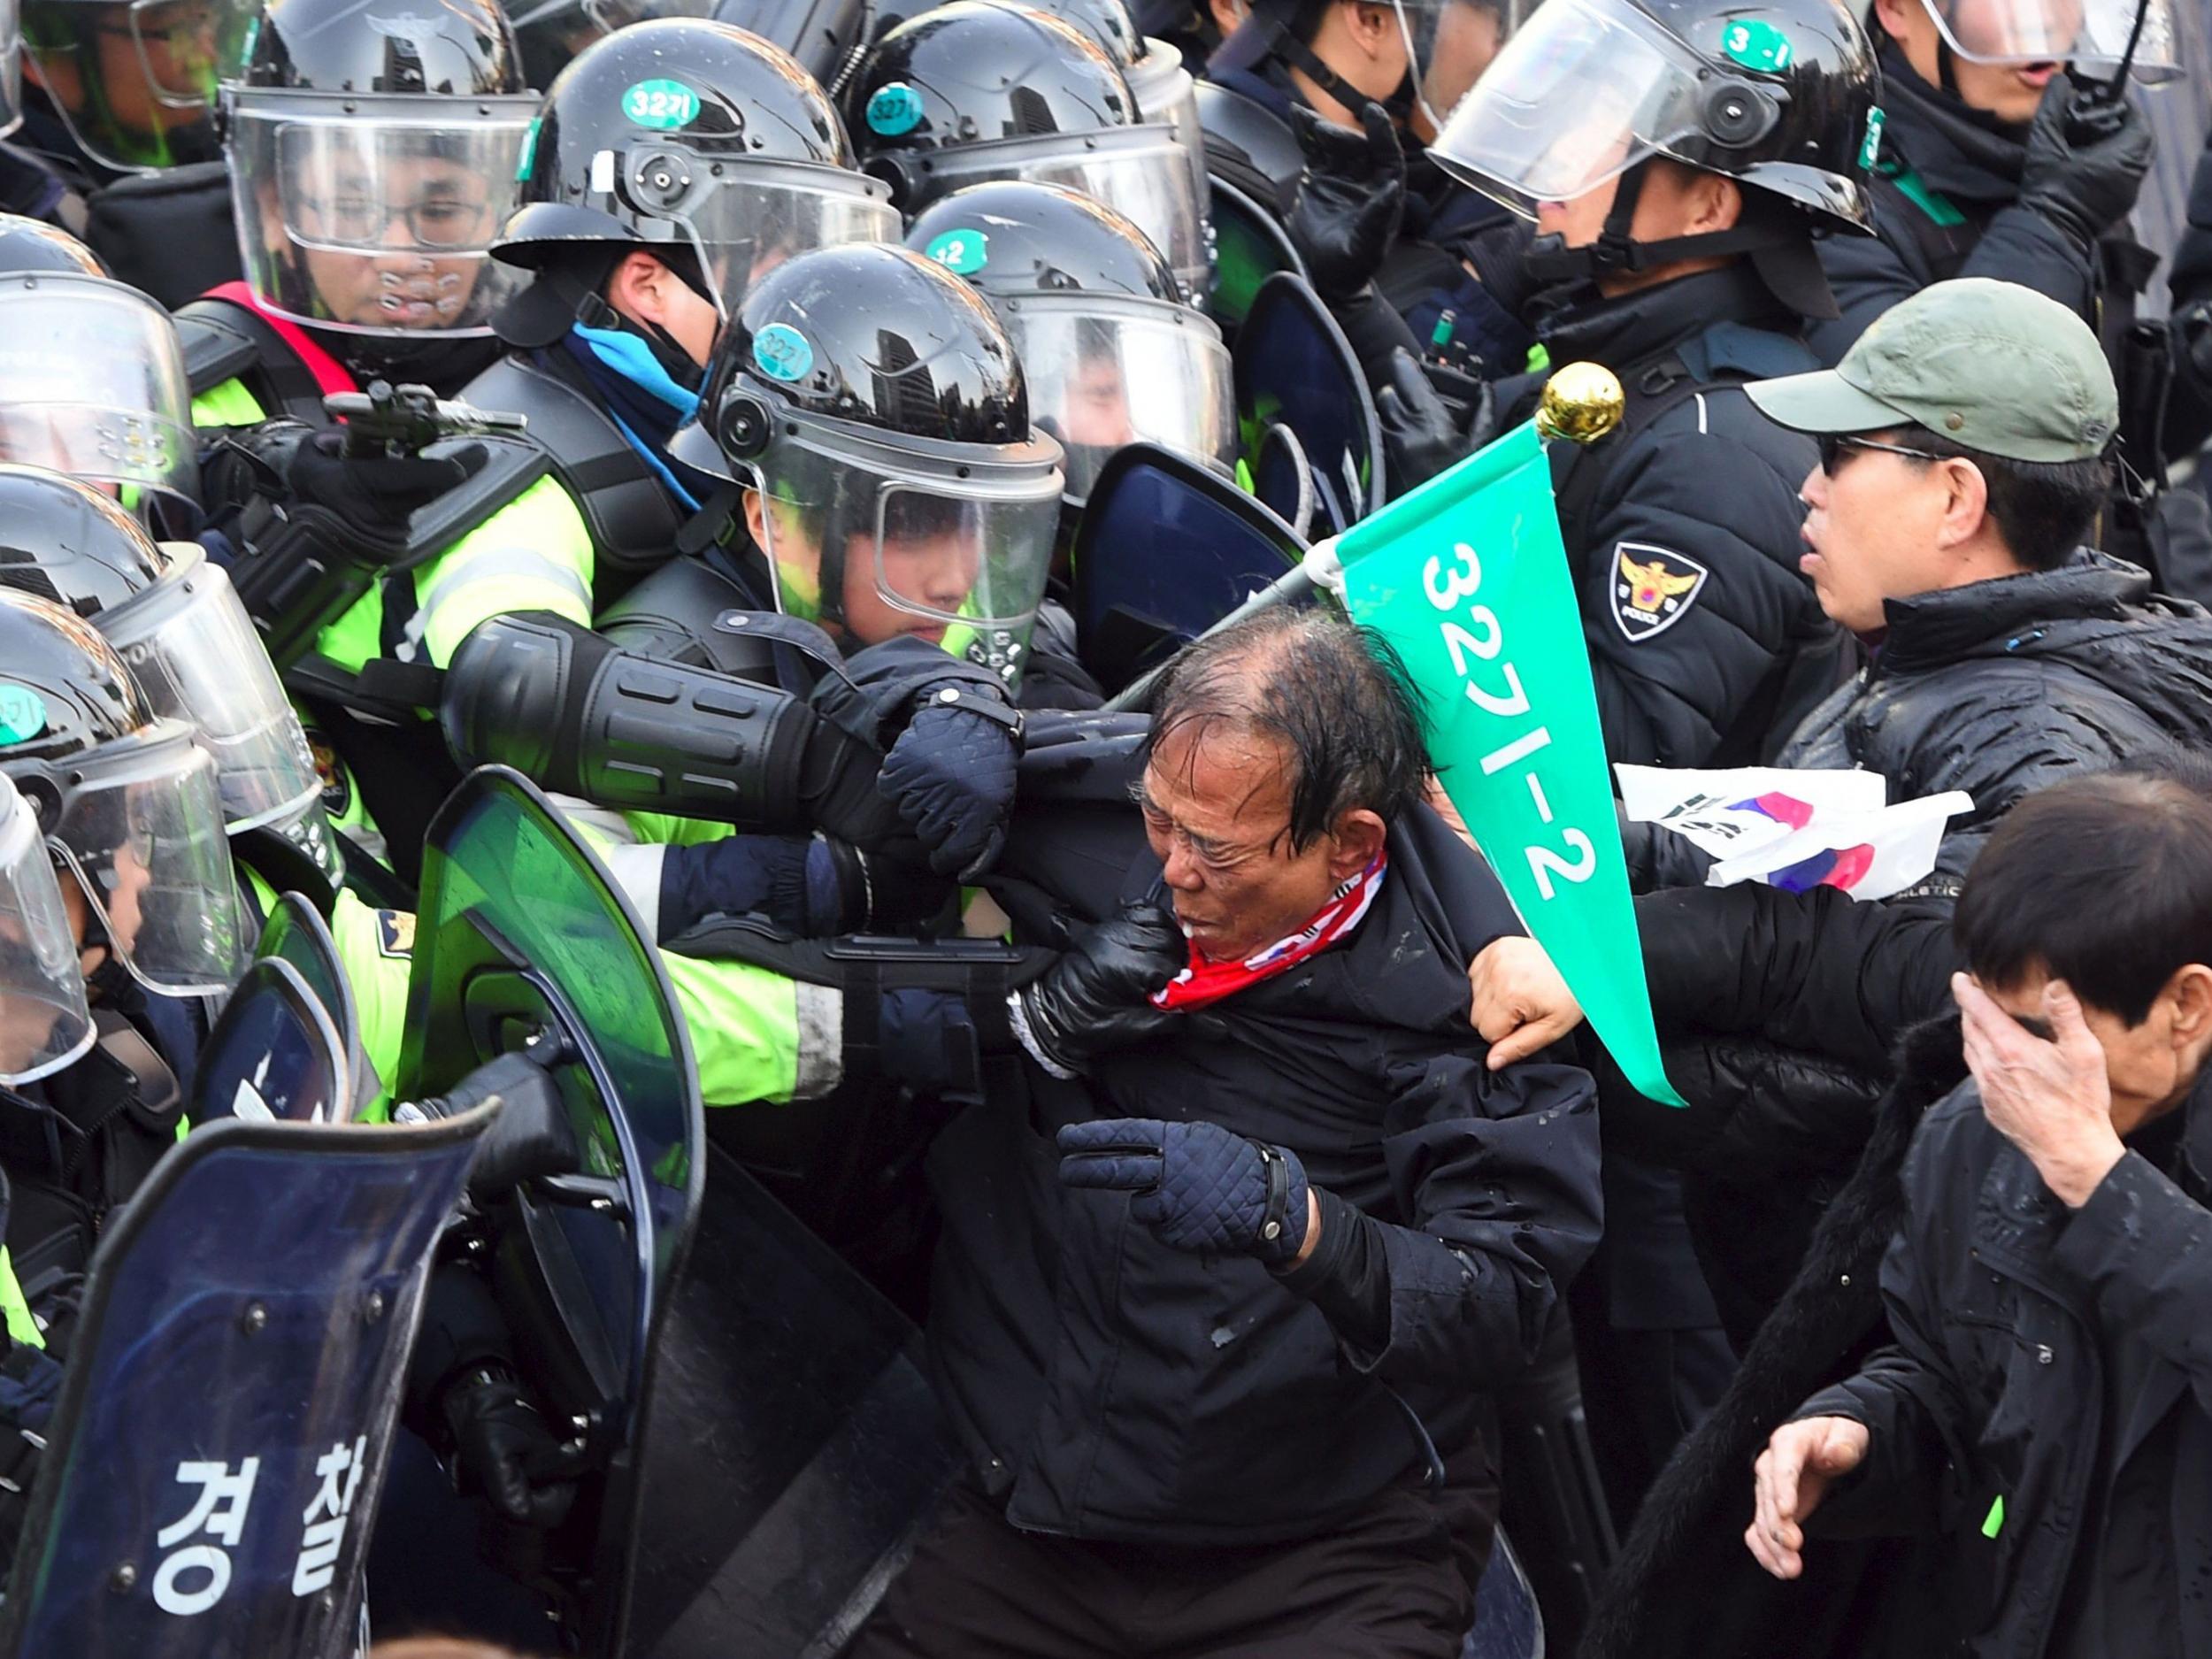 South Korean supporters of Park Geun-Hye clash with police after the announcement of the Constitutional Court ruling over her impeachment, in Seoul on 10 March, 2017